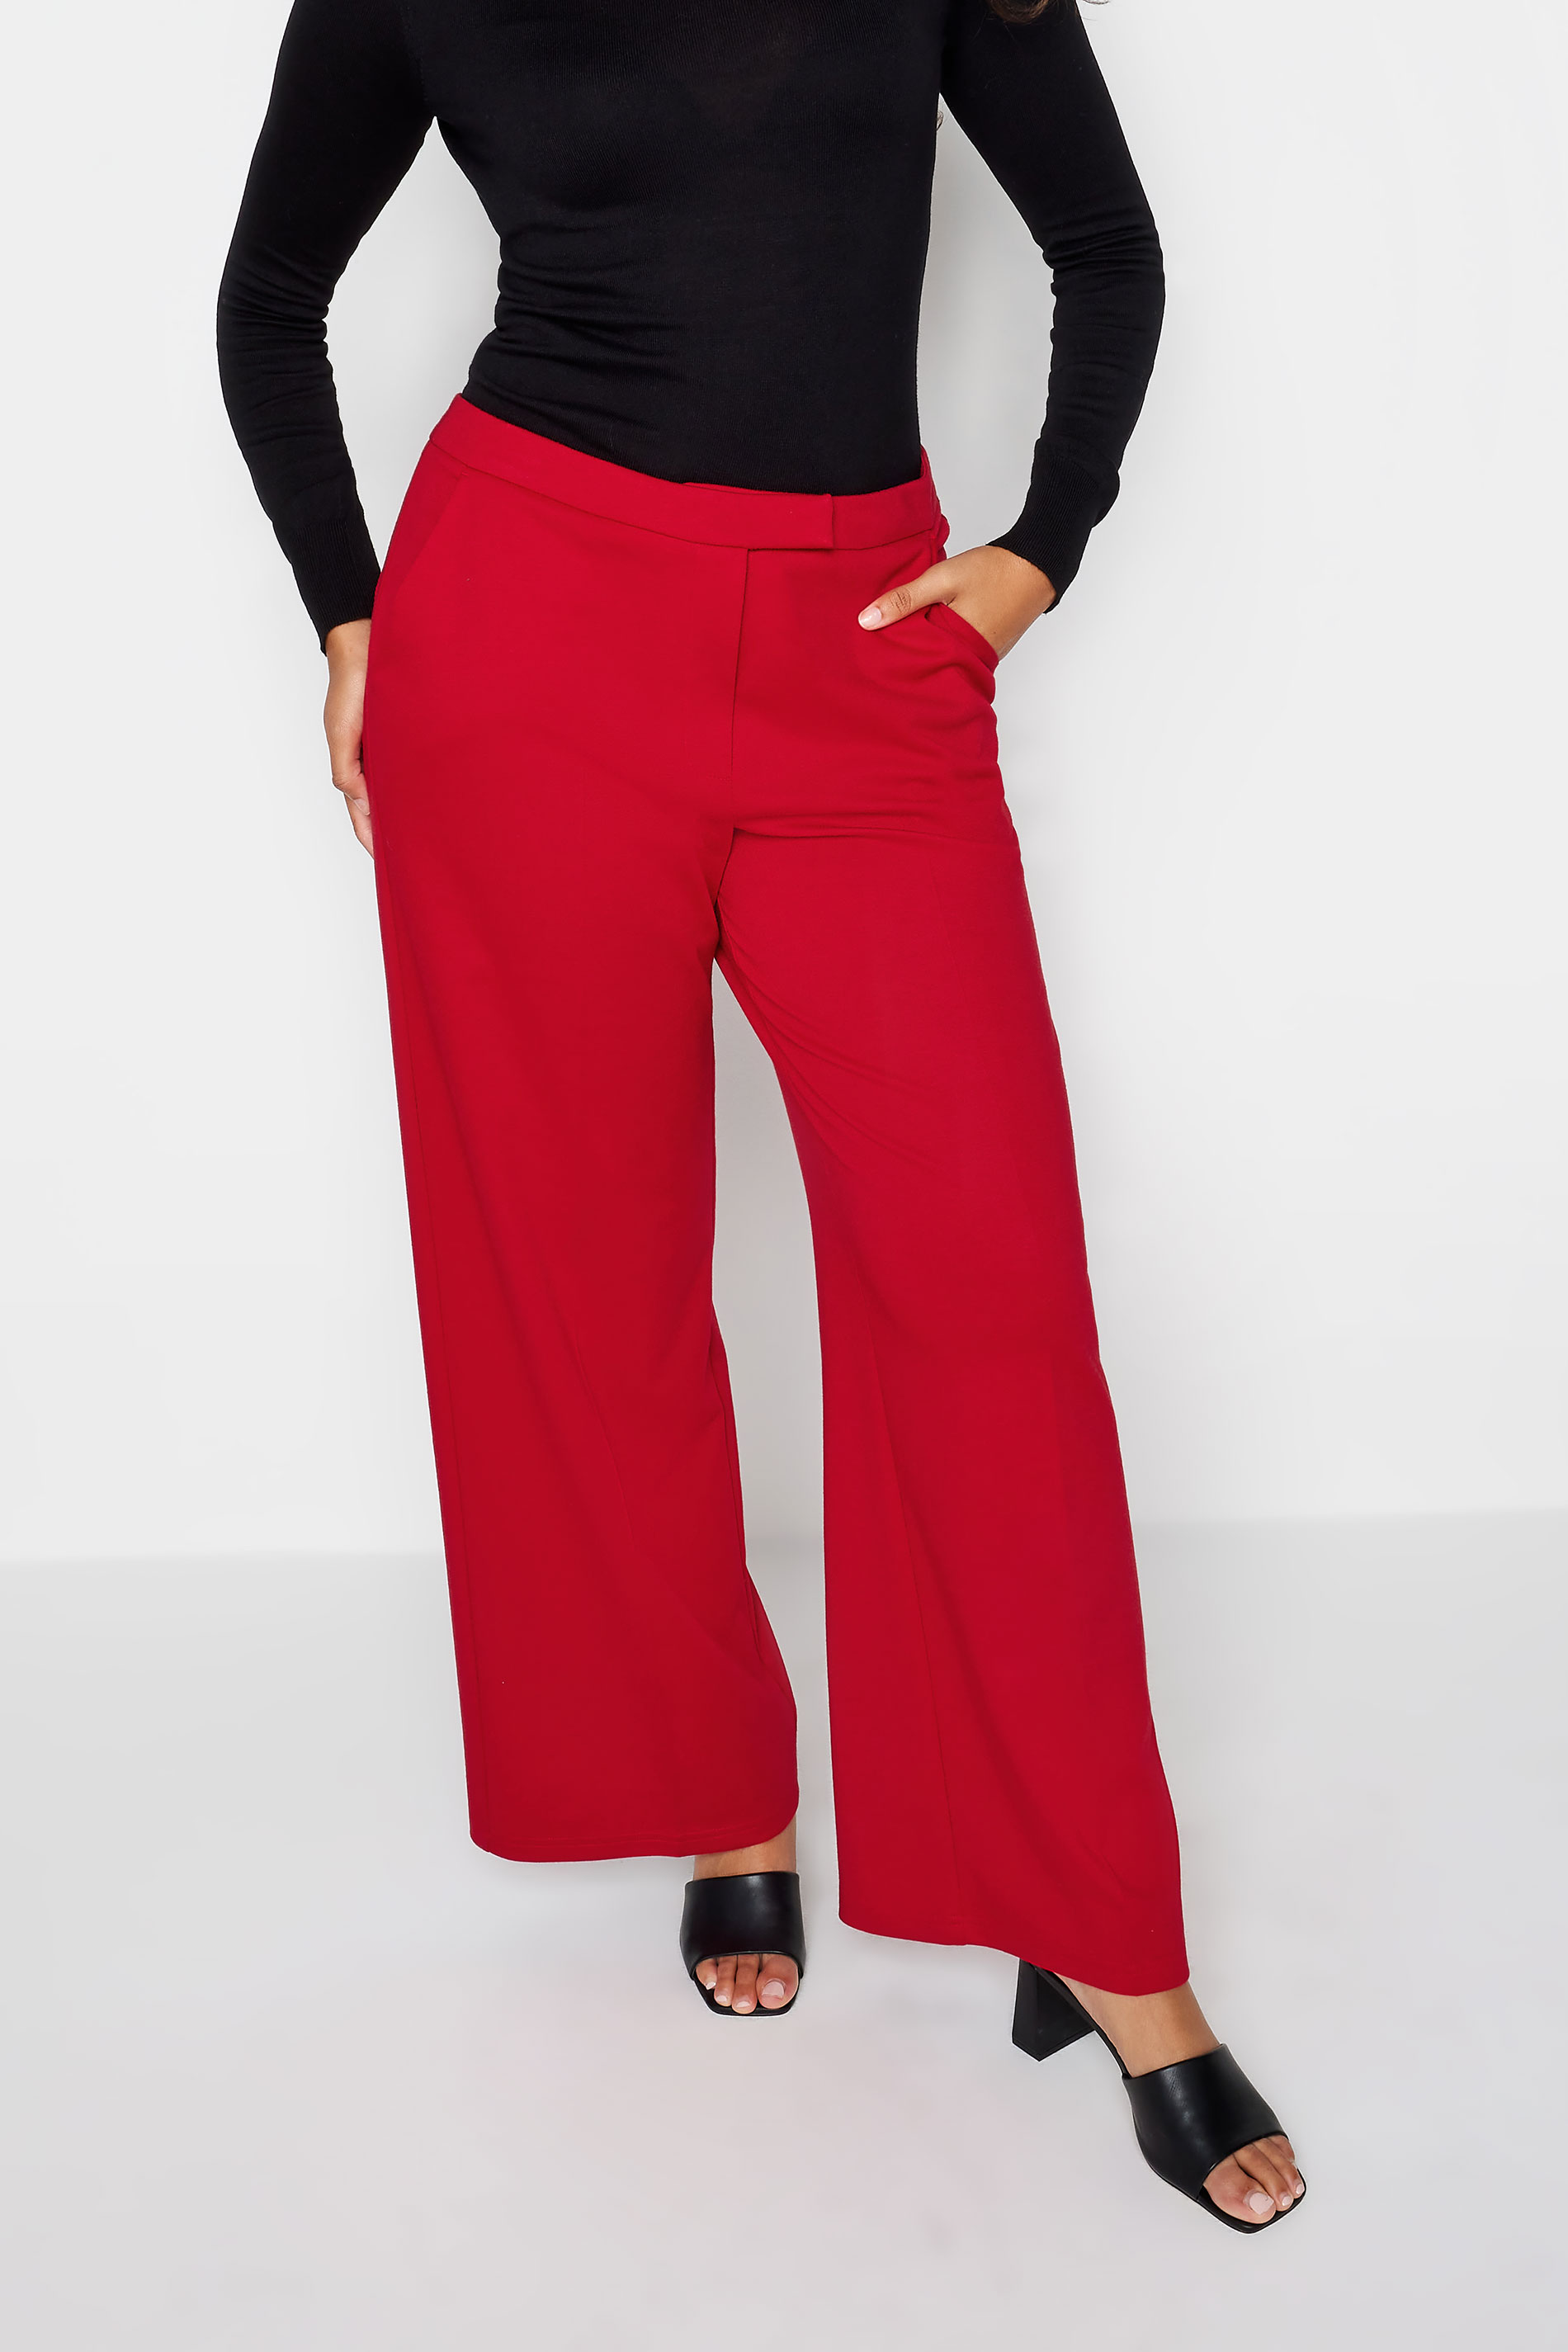 Buy ONLY Solid Polyester Regular Fit Women's Pants | Shoppers Stop